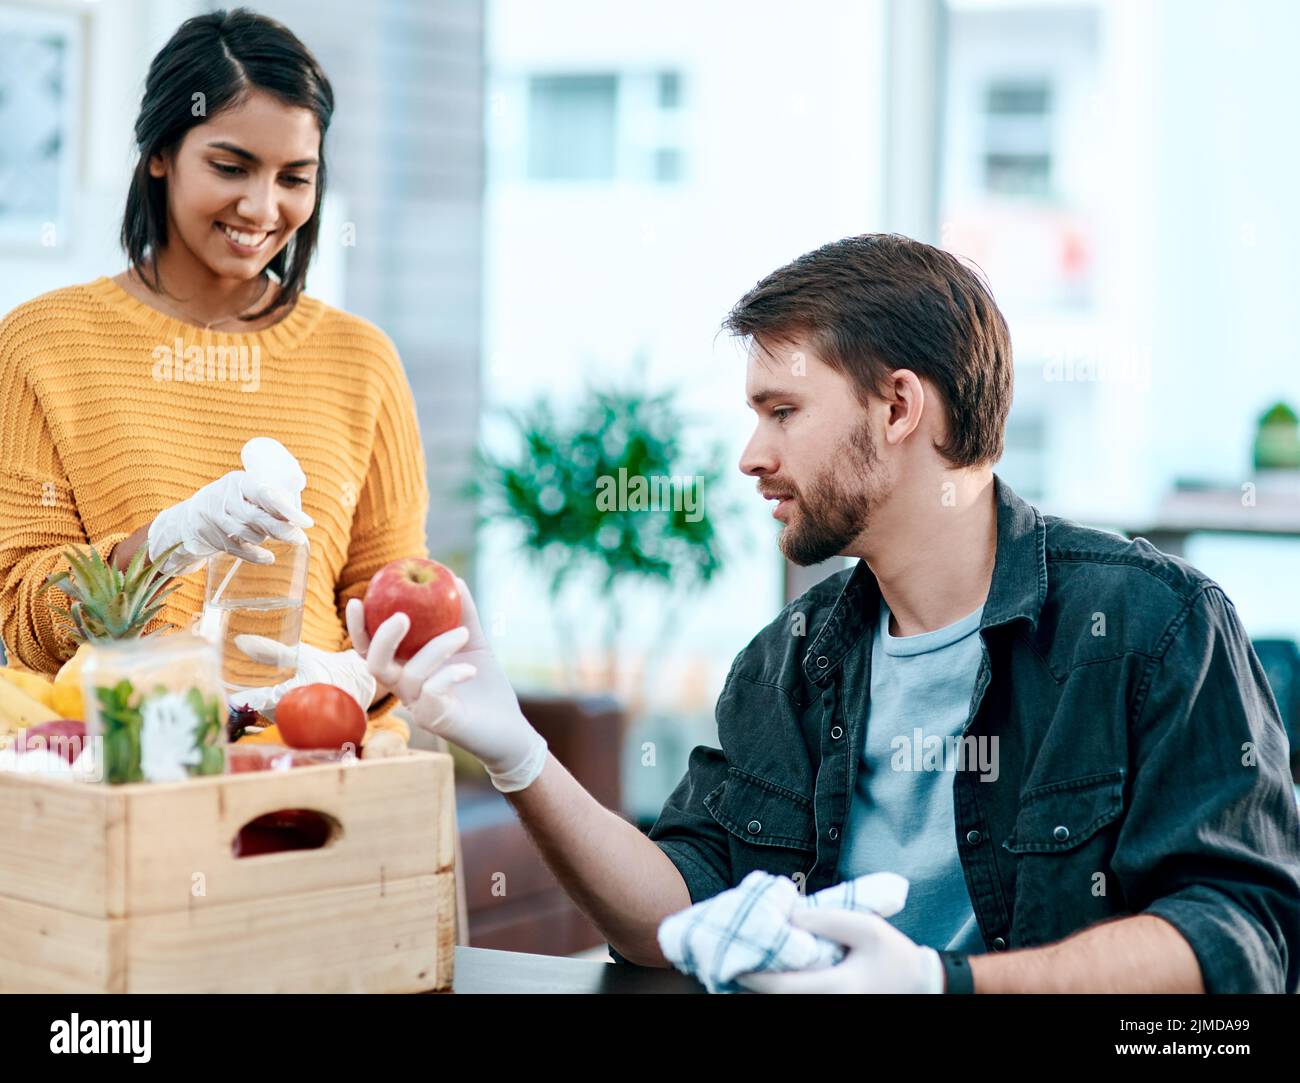 Times of crisis need extra care. a young couple disinfecting their groceries at home. Stock Photo